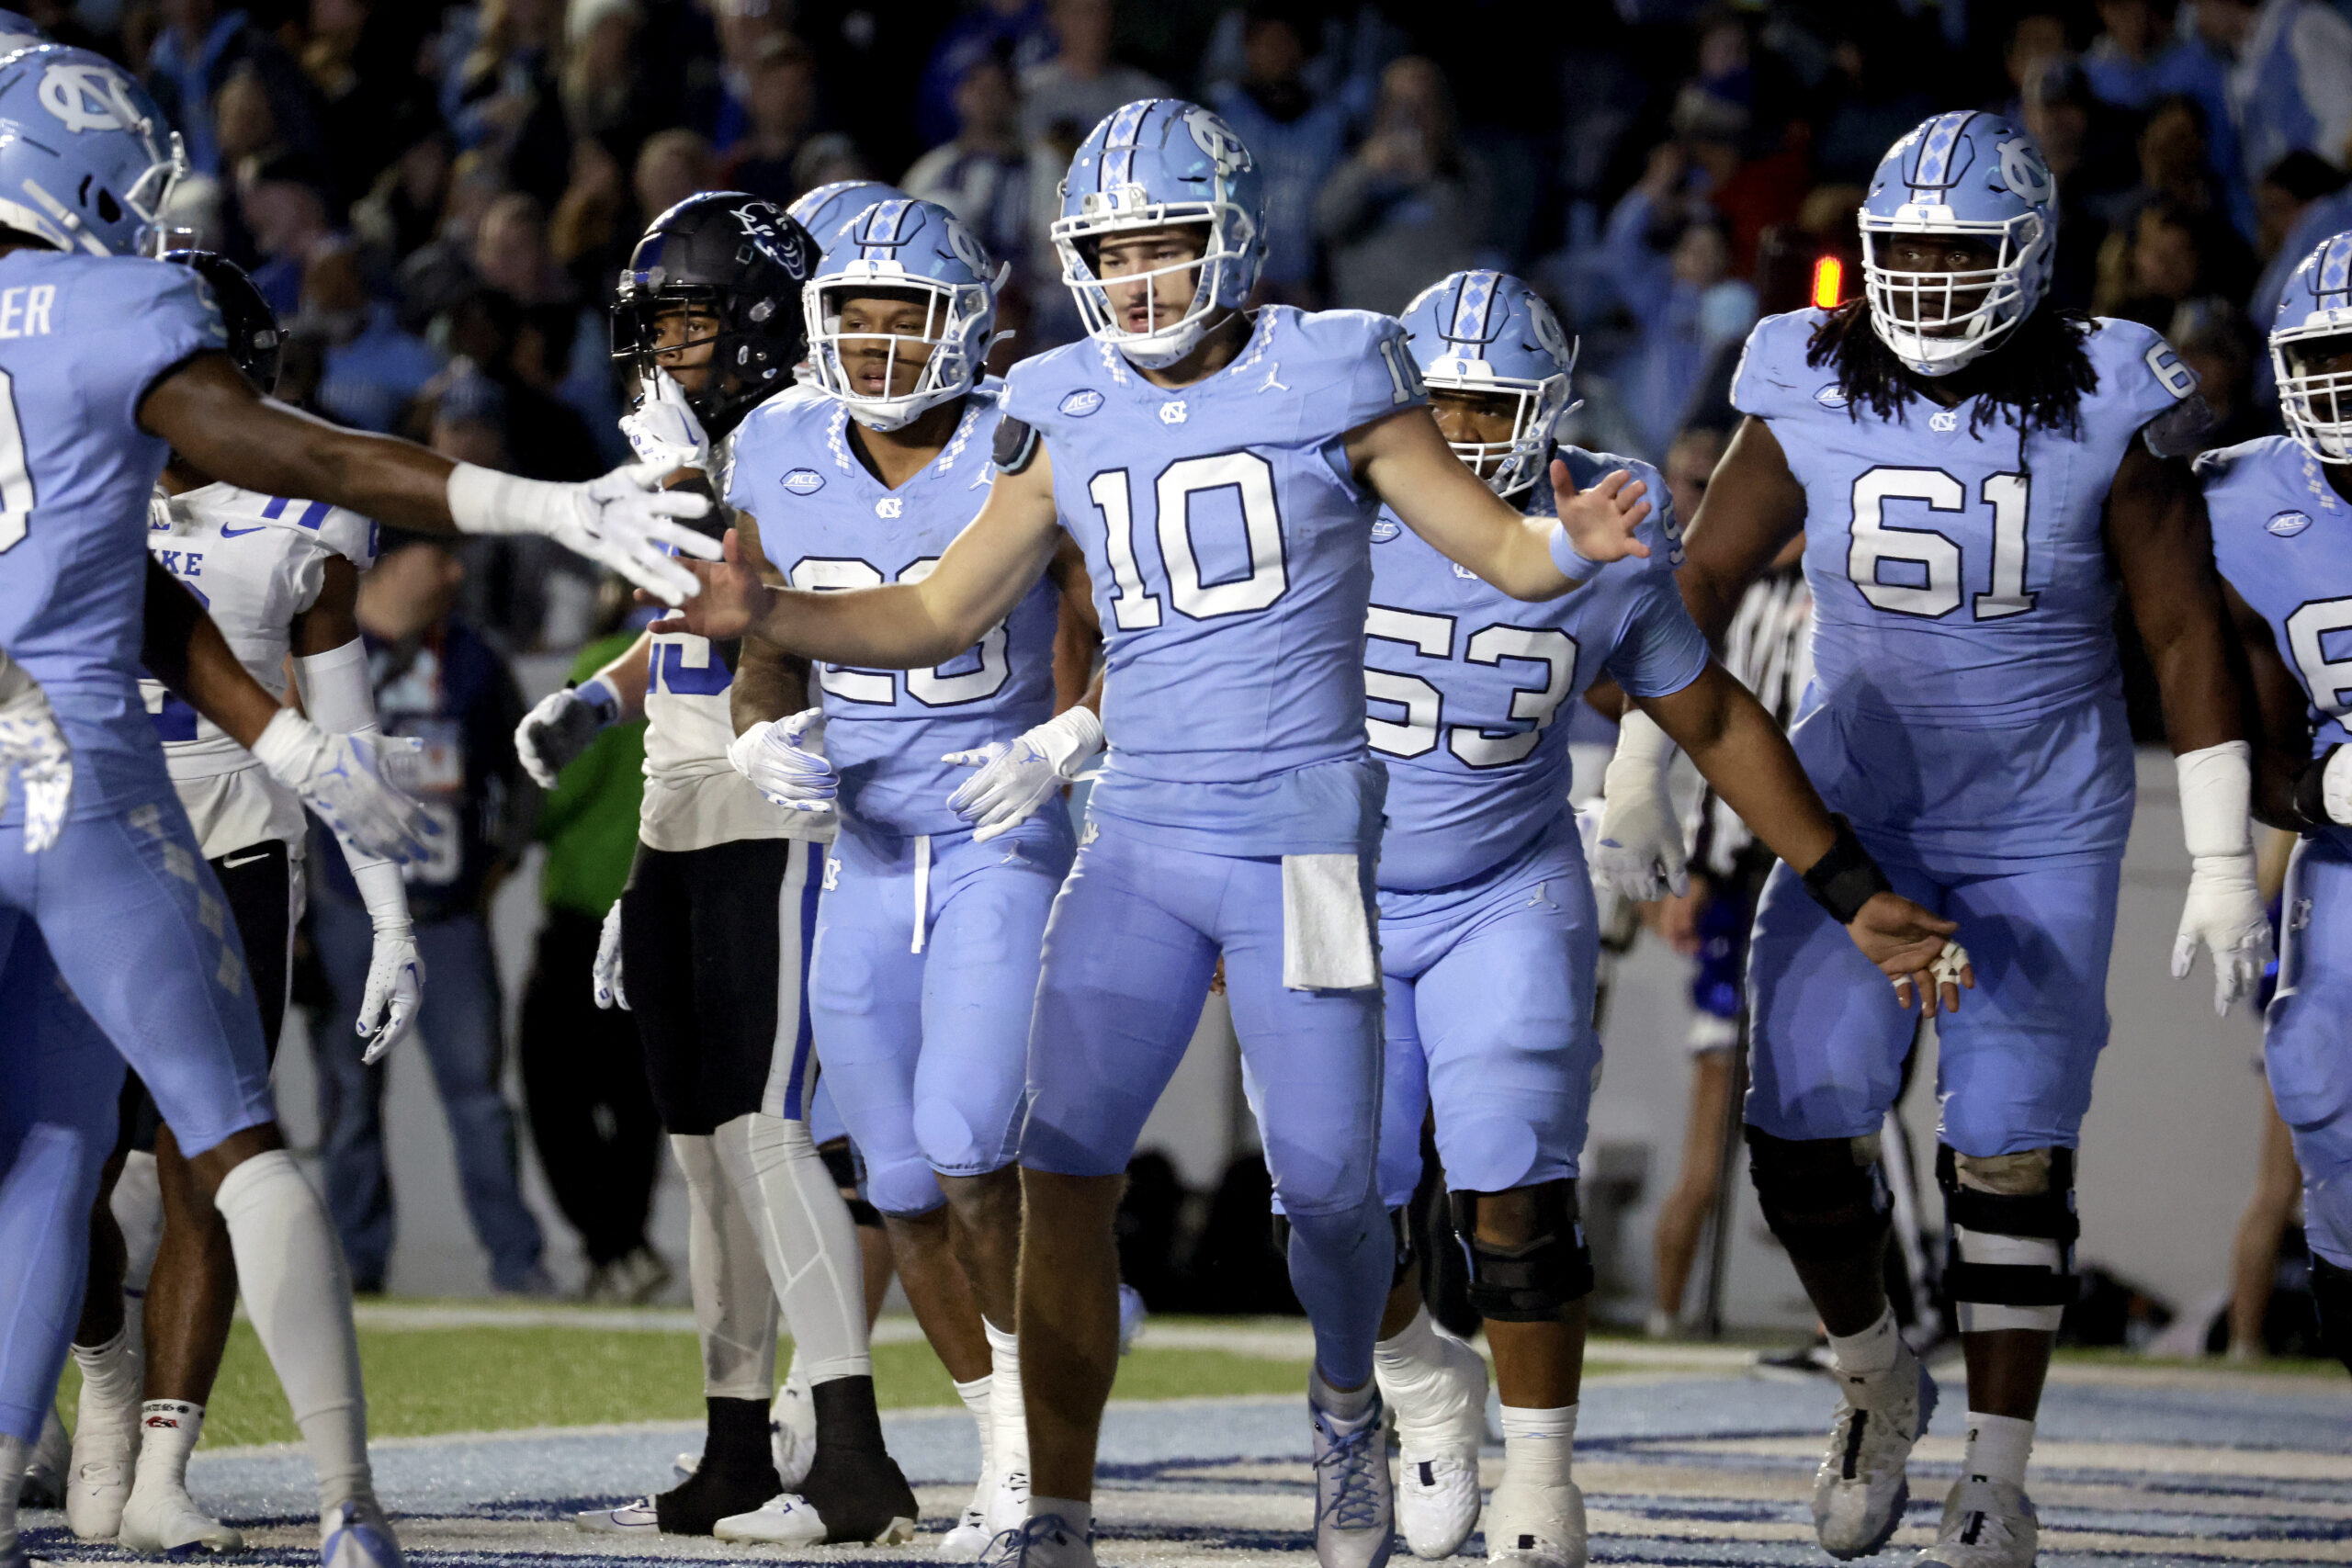 UNC Football at Clemson: How to Watch, Streaming Options, Kickoff Time